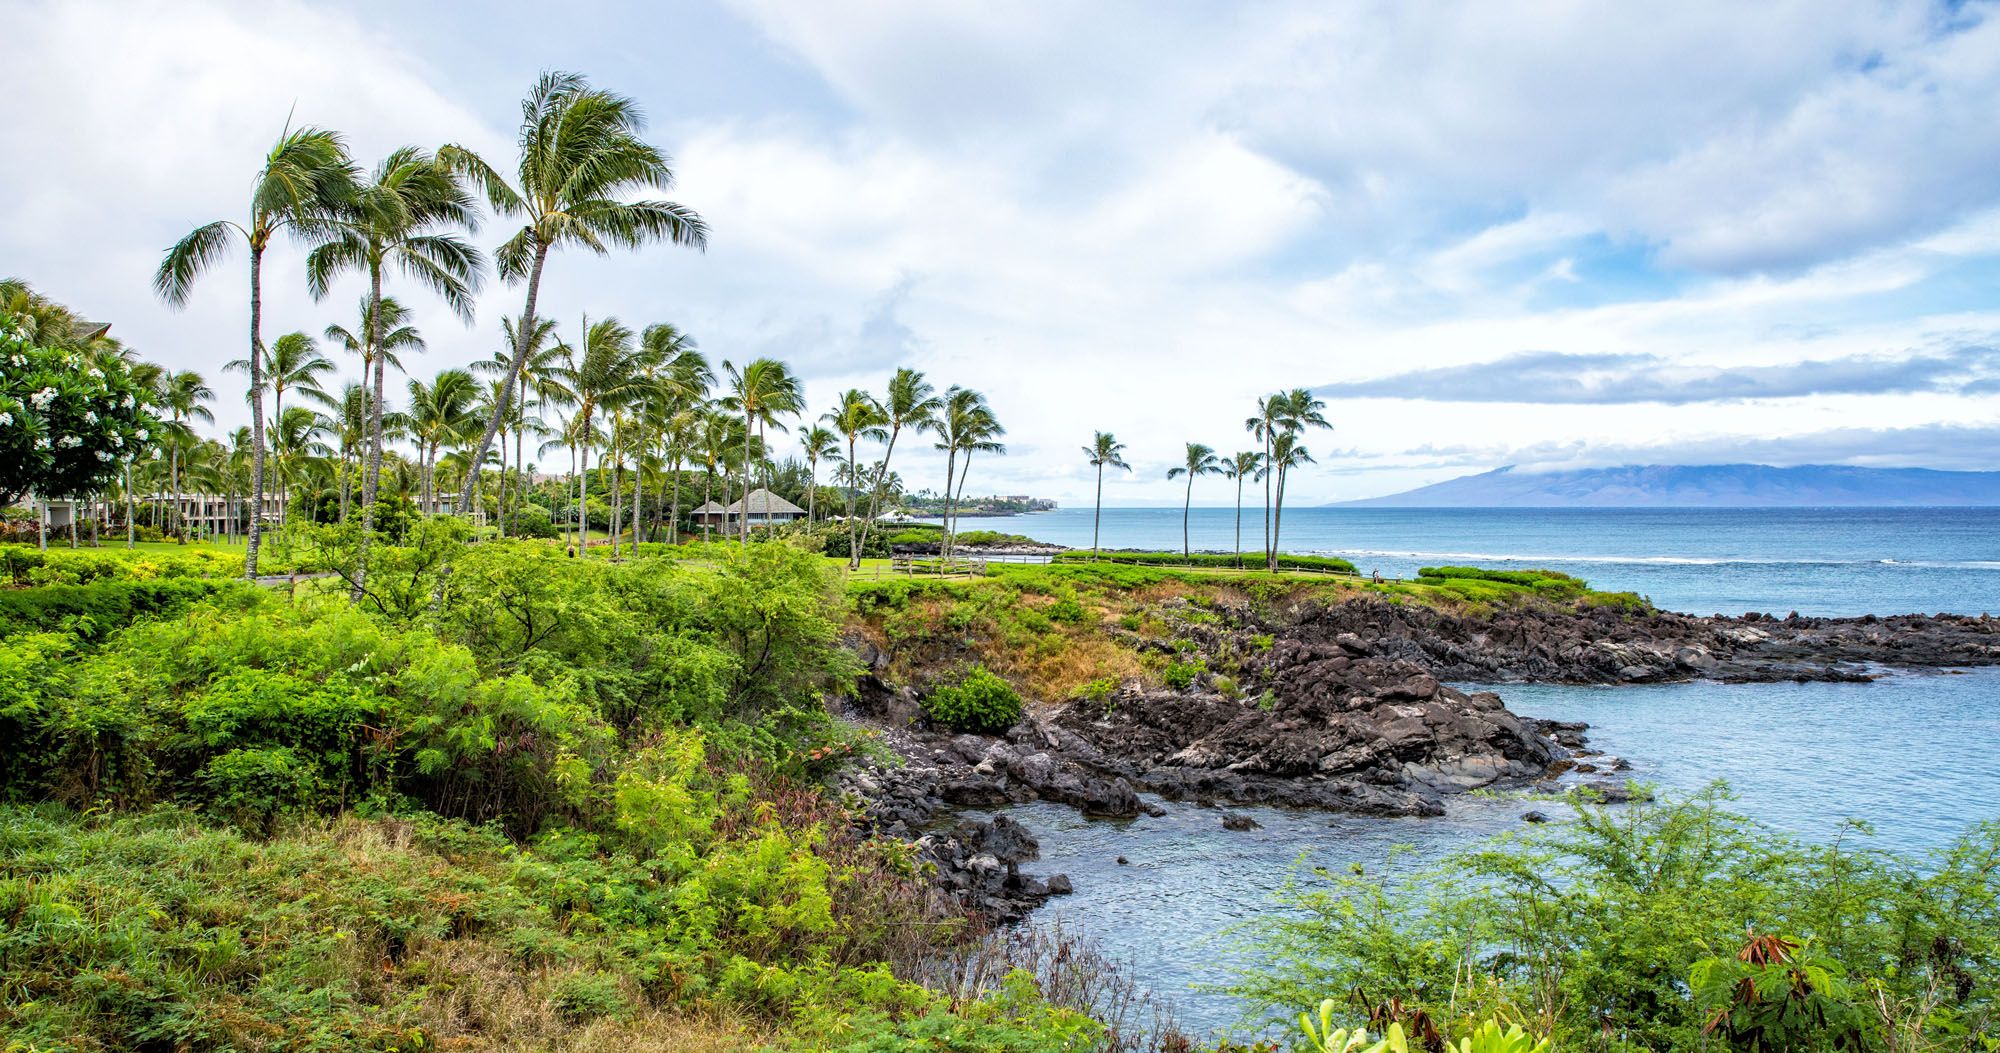 Featured image for “Maui Bucket List: 20 Best Things to Do in Maui, Hawaii”